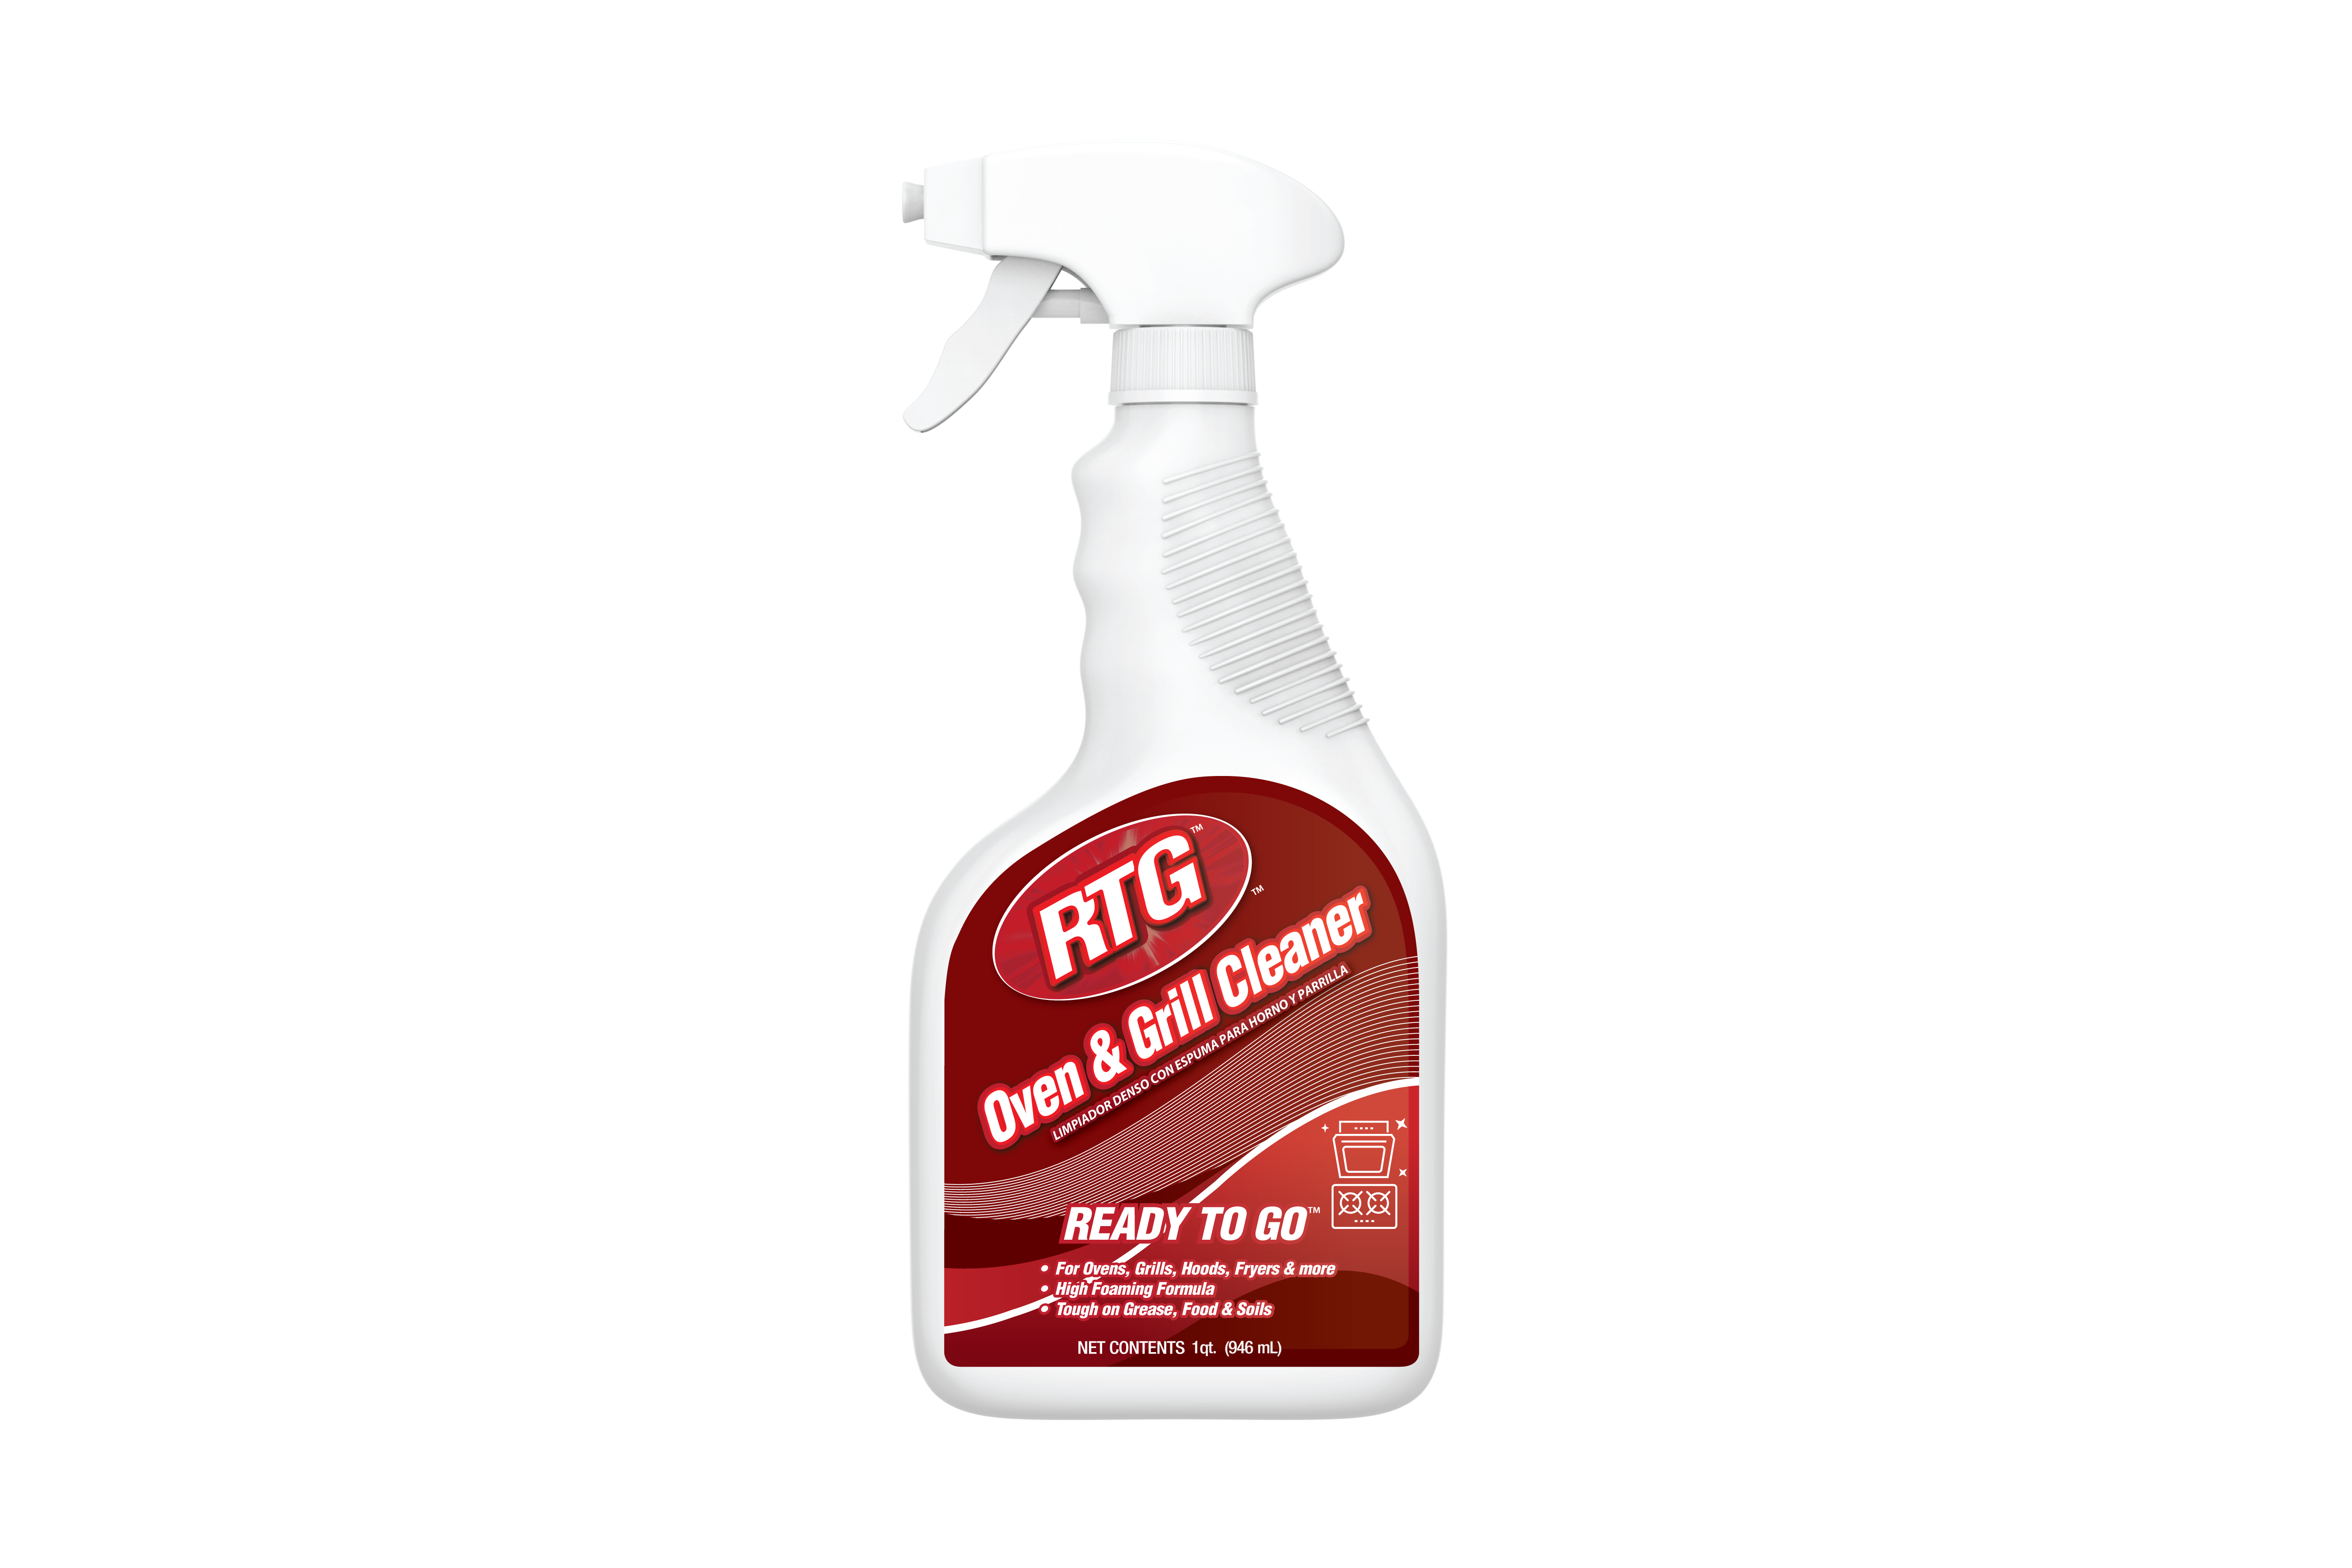 RTG Stainless Steel Cleaner & Polish - Dyno Manufacturing